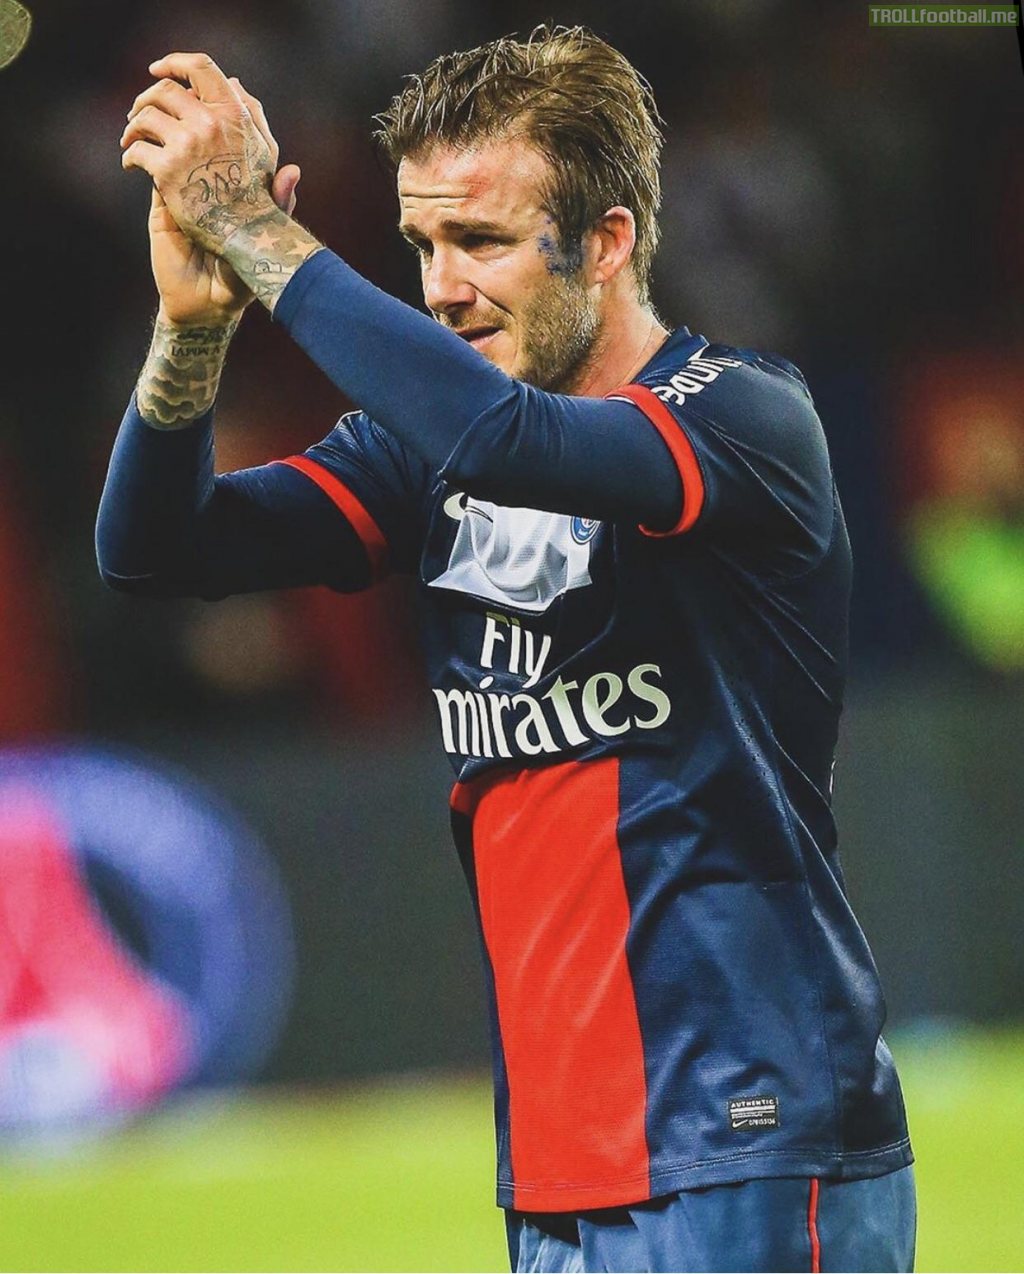 6 years ago today, David Beckham played his last game in professional football😢